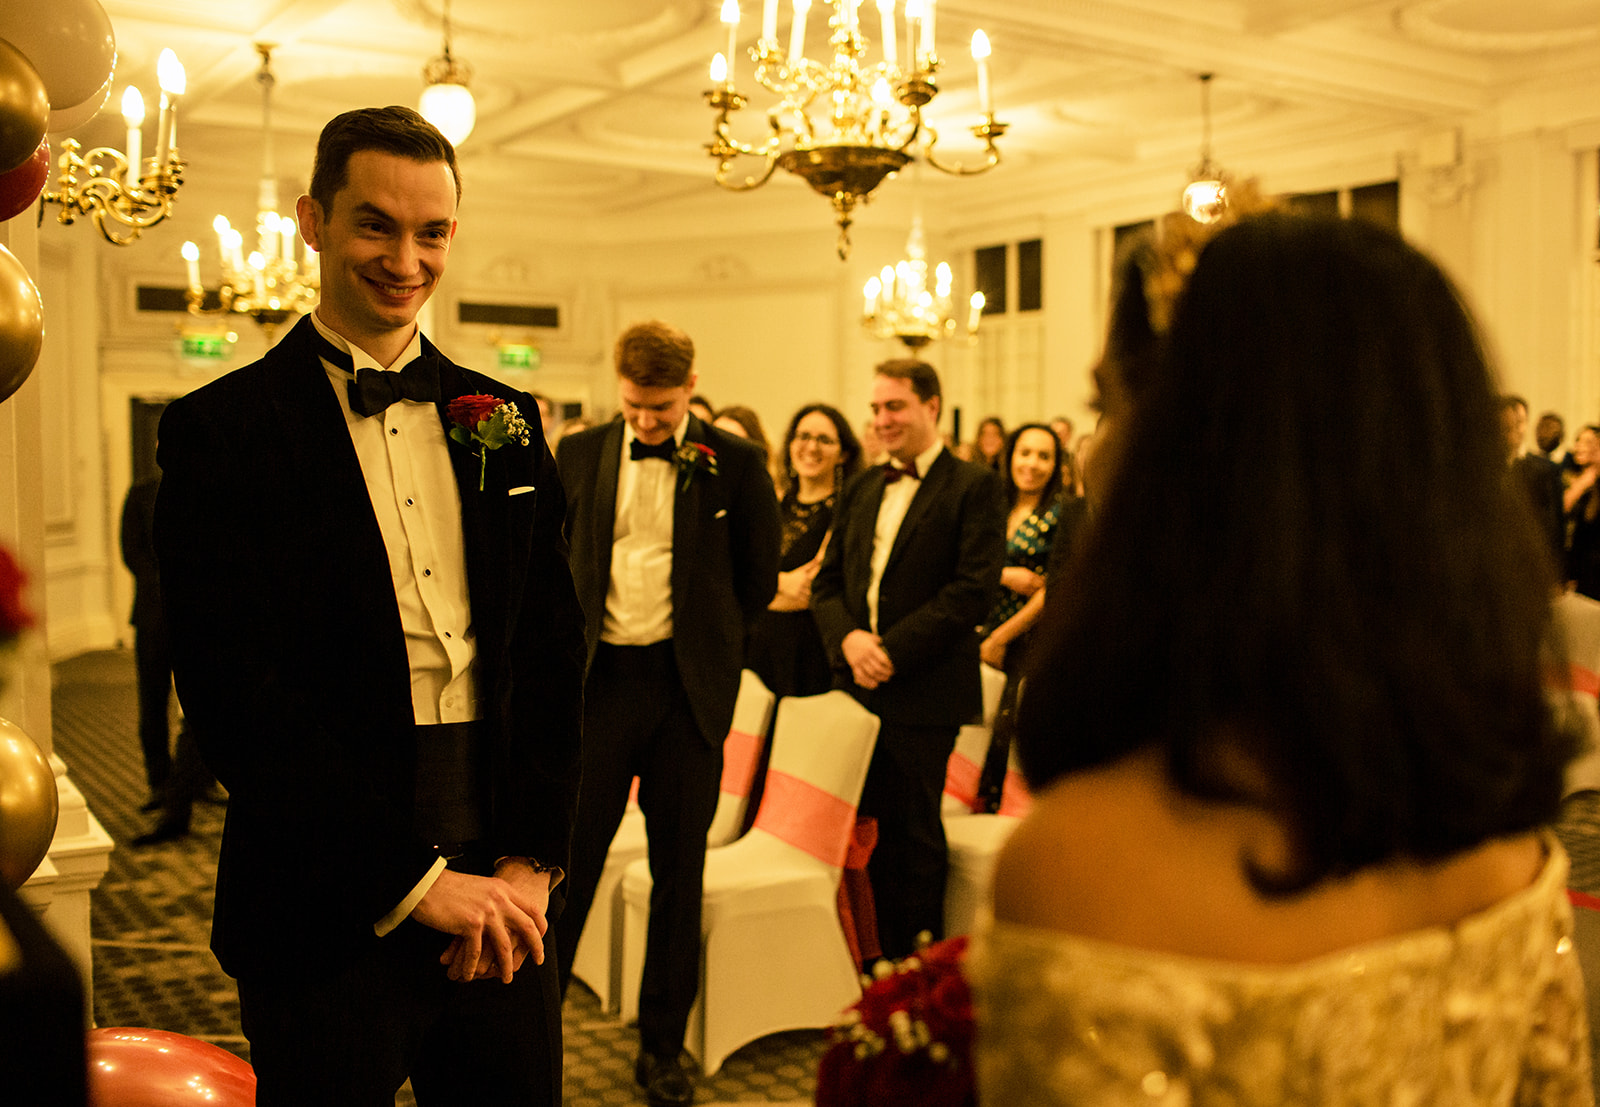 Groom-smiling-at-the-alter-looking-at-the-bride